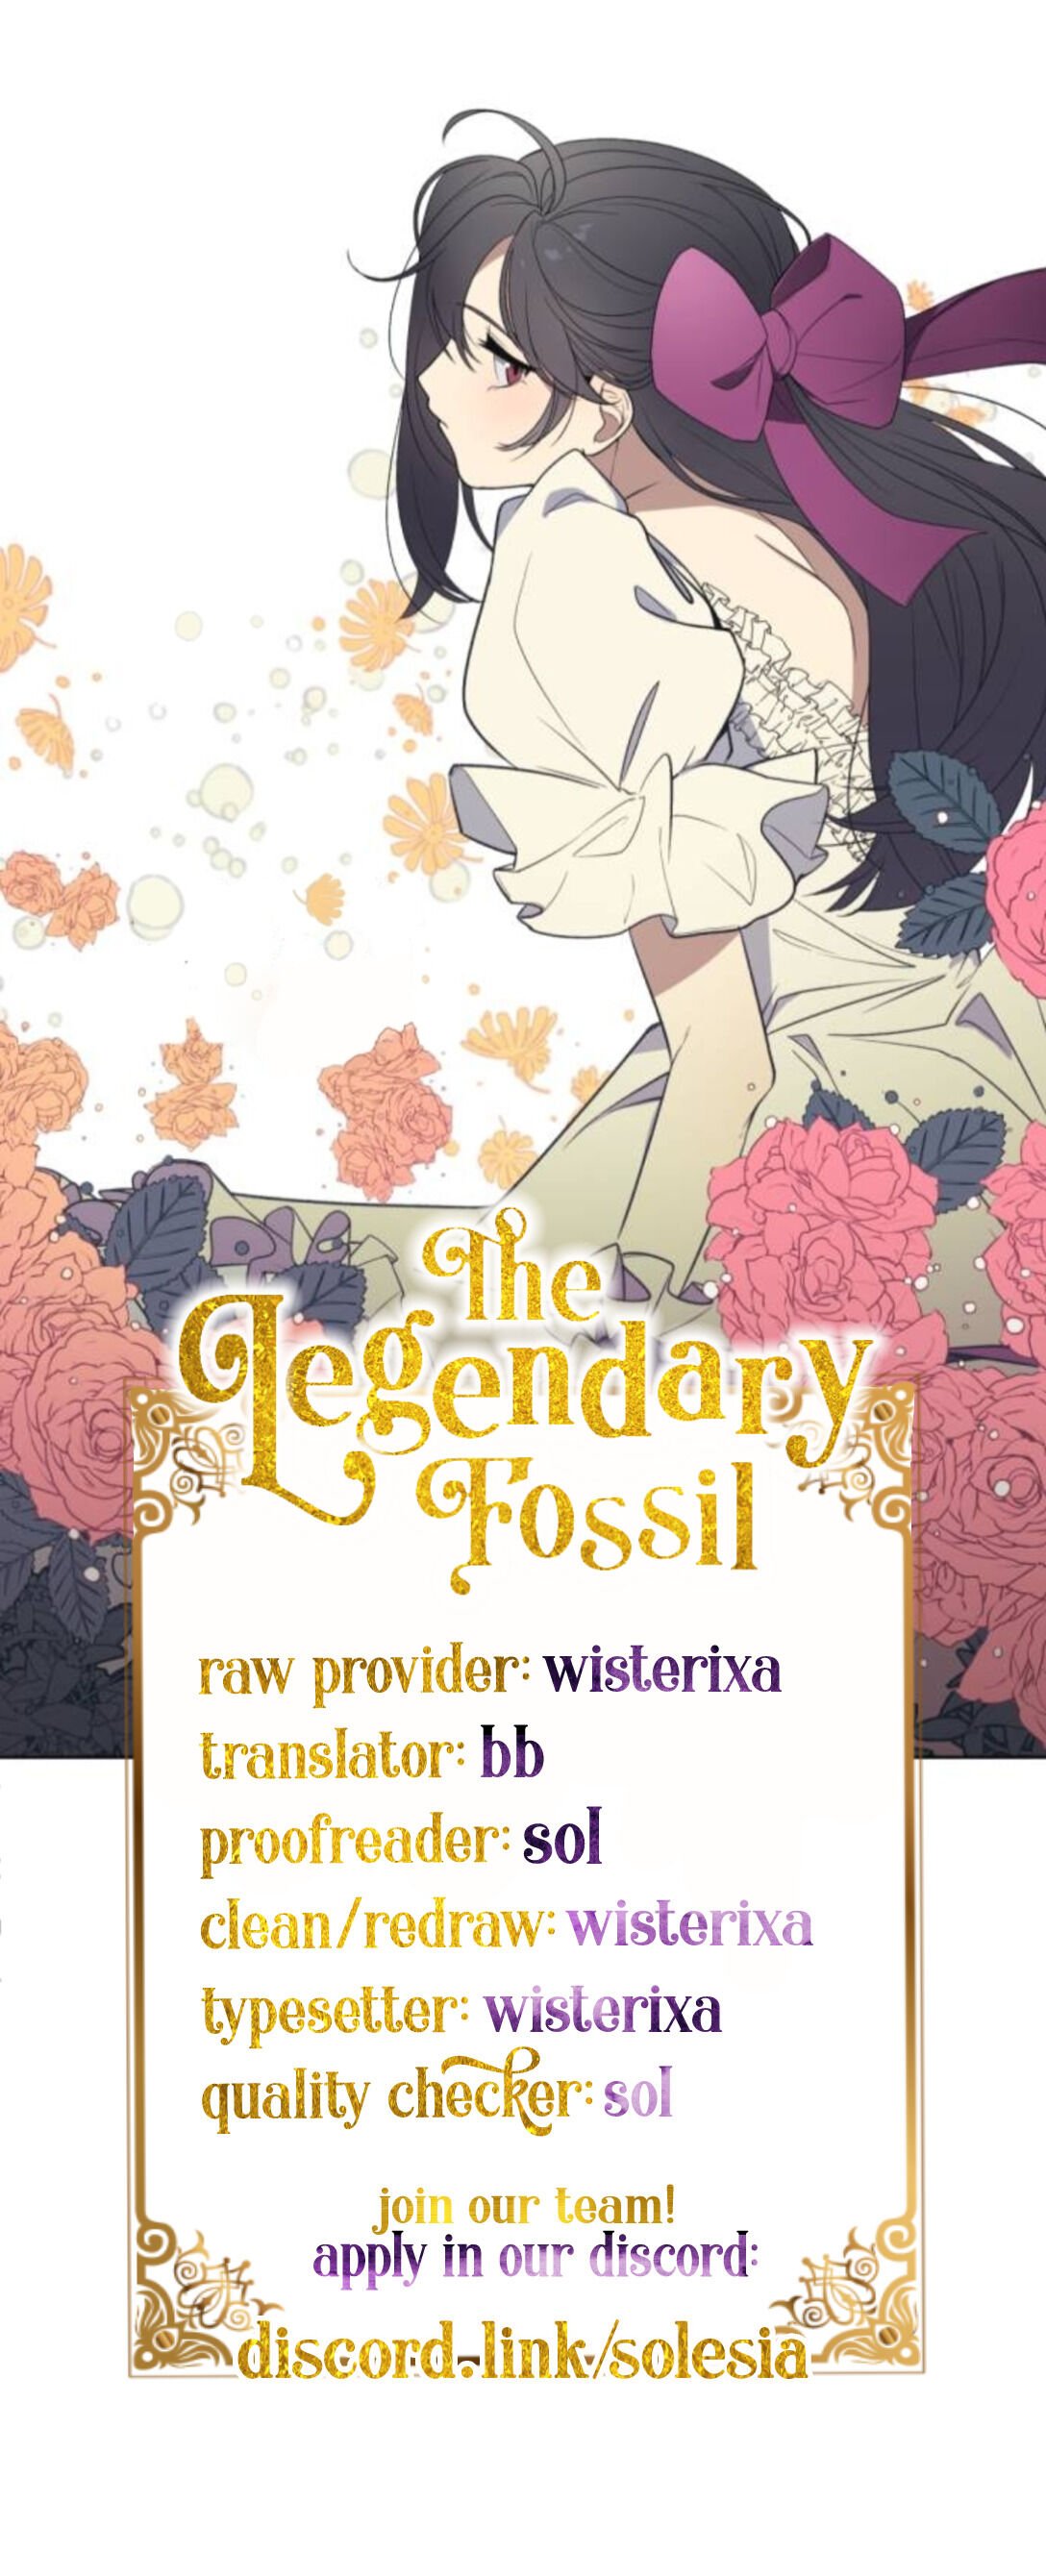 The Legendary Fossil chapter 4